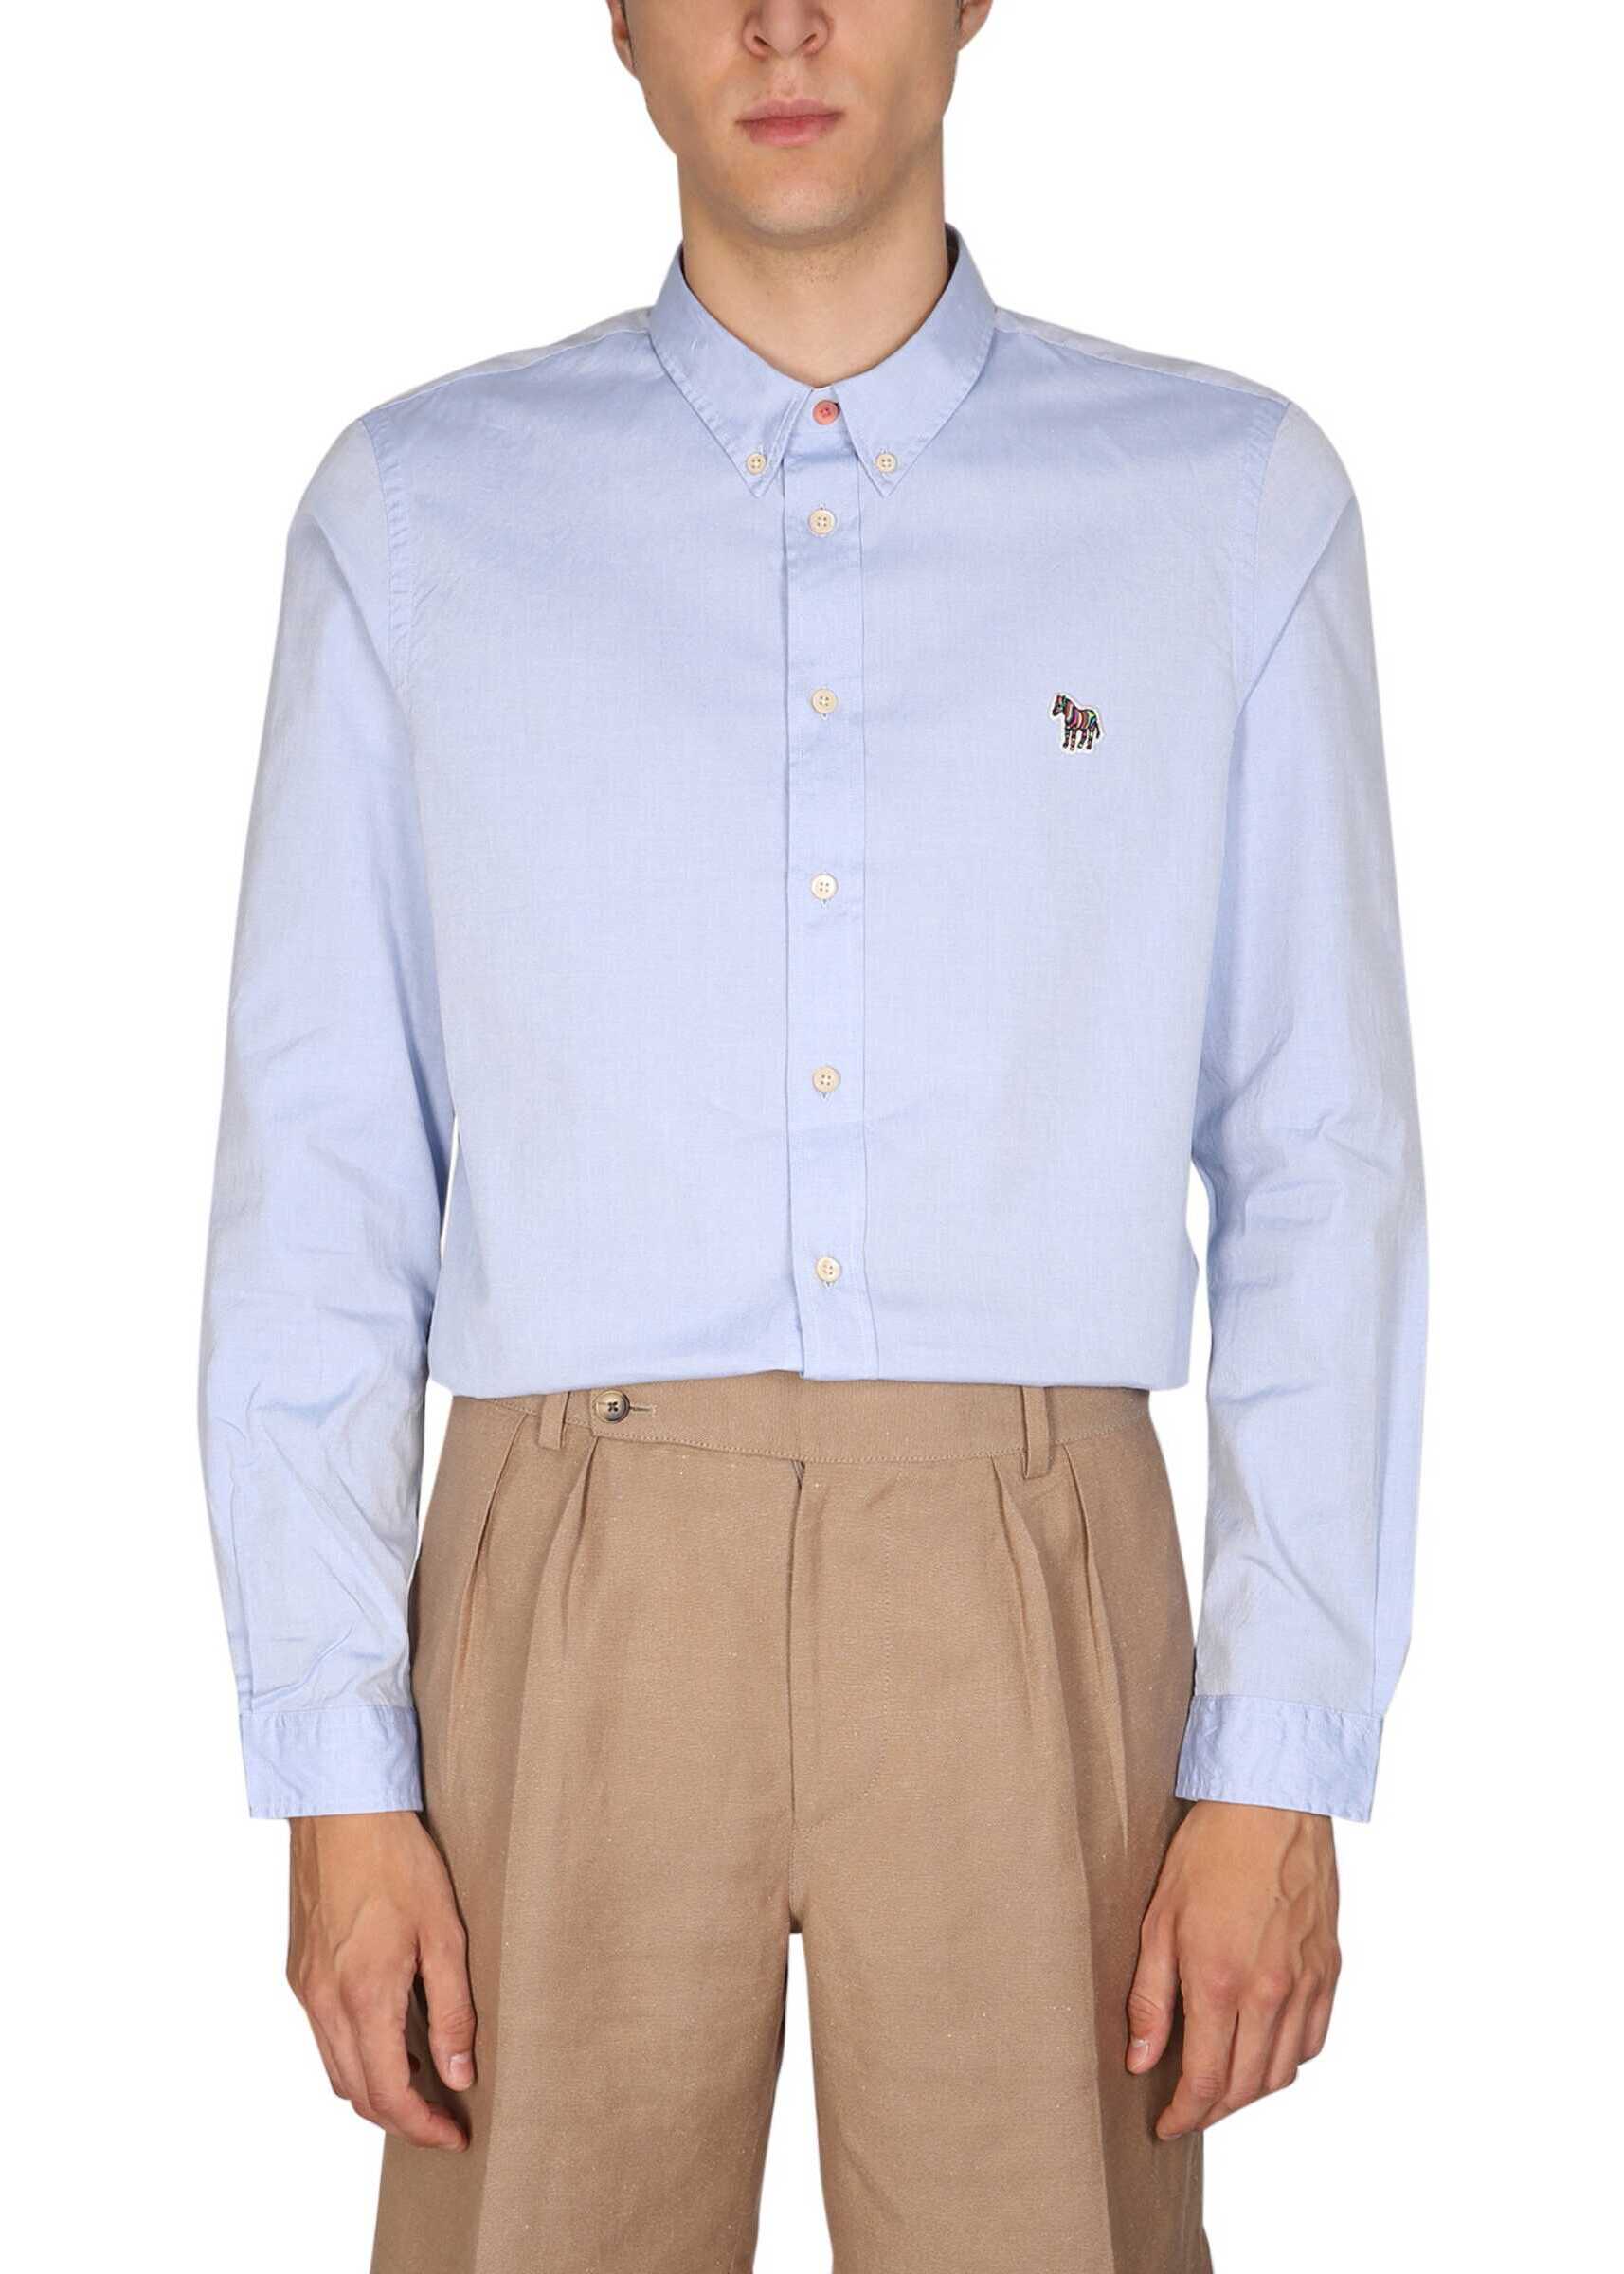 PS by Paul Smith Regular Fit Shirt* BLUE image4